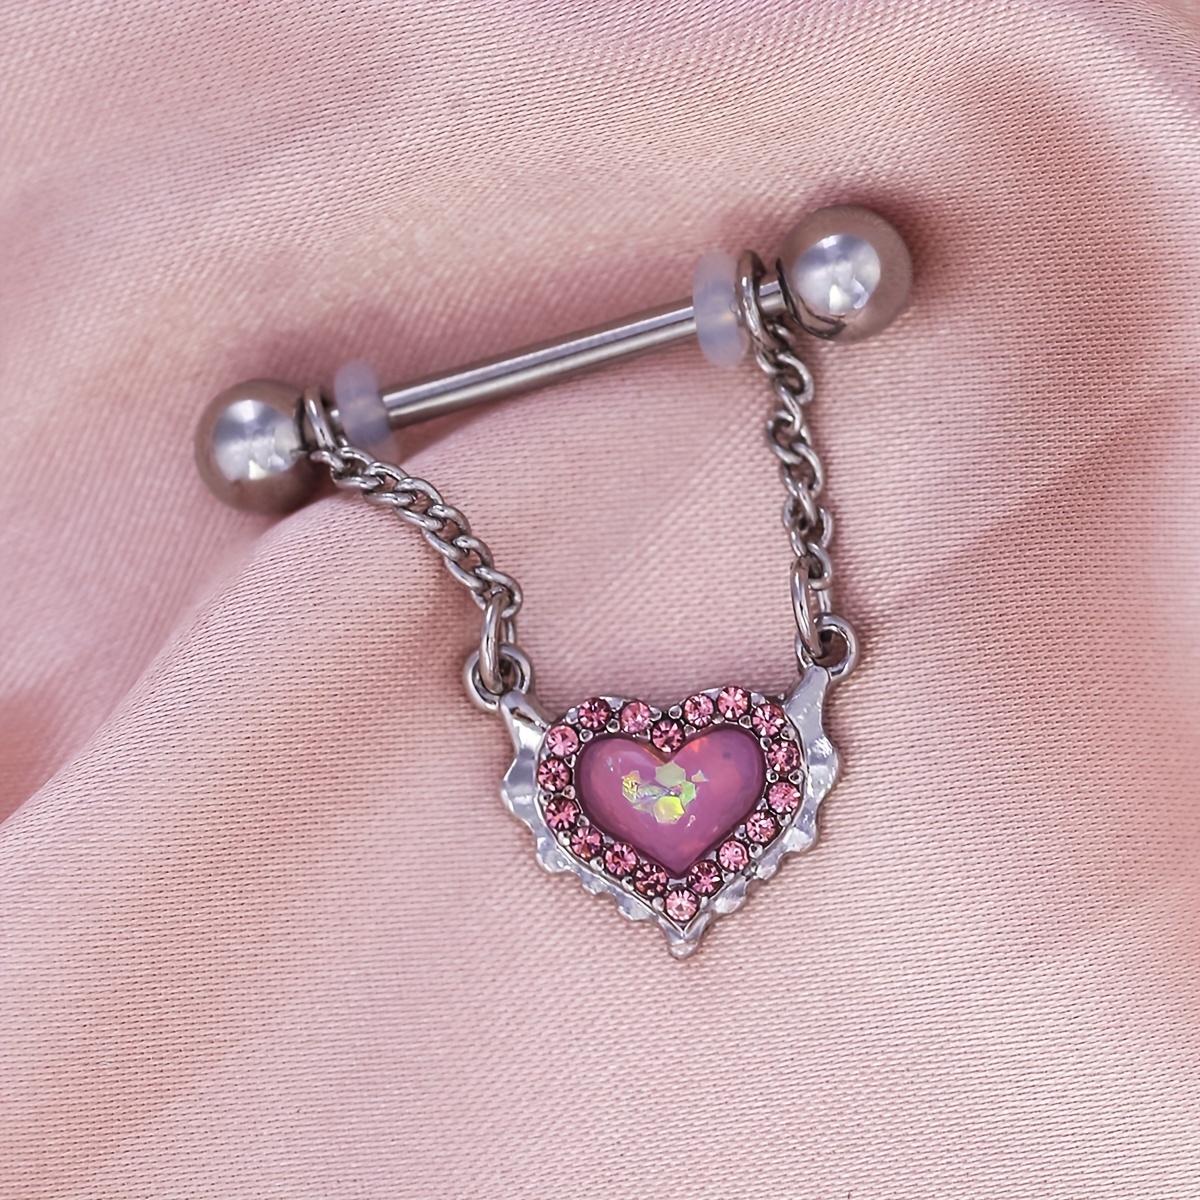 DNice Stone Heart Style Nipple Ring Piercing Jewelry Pink Color Stone Drop  Piercing Body Jewelry Shipping 7Rttk From Yummy_shop, $12.43